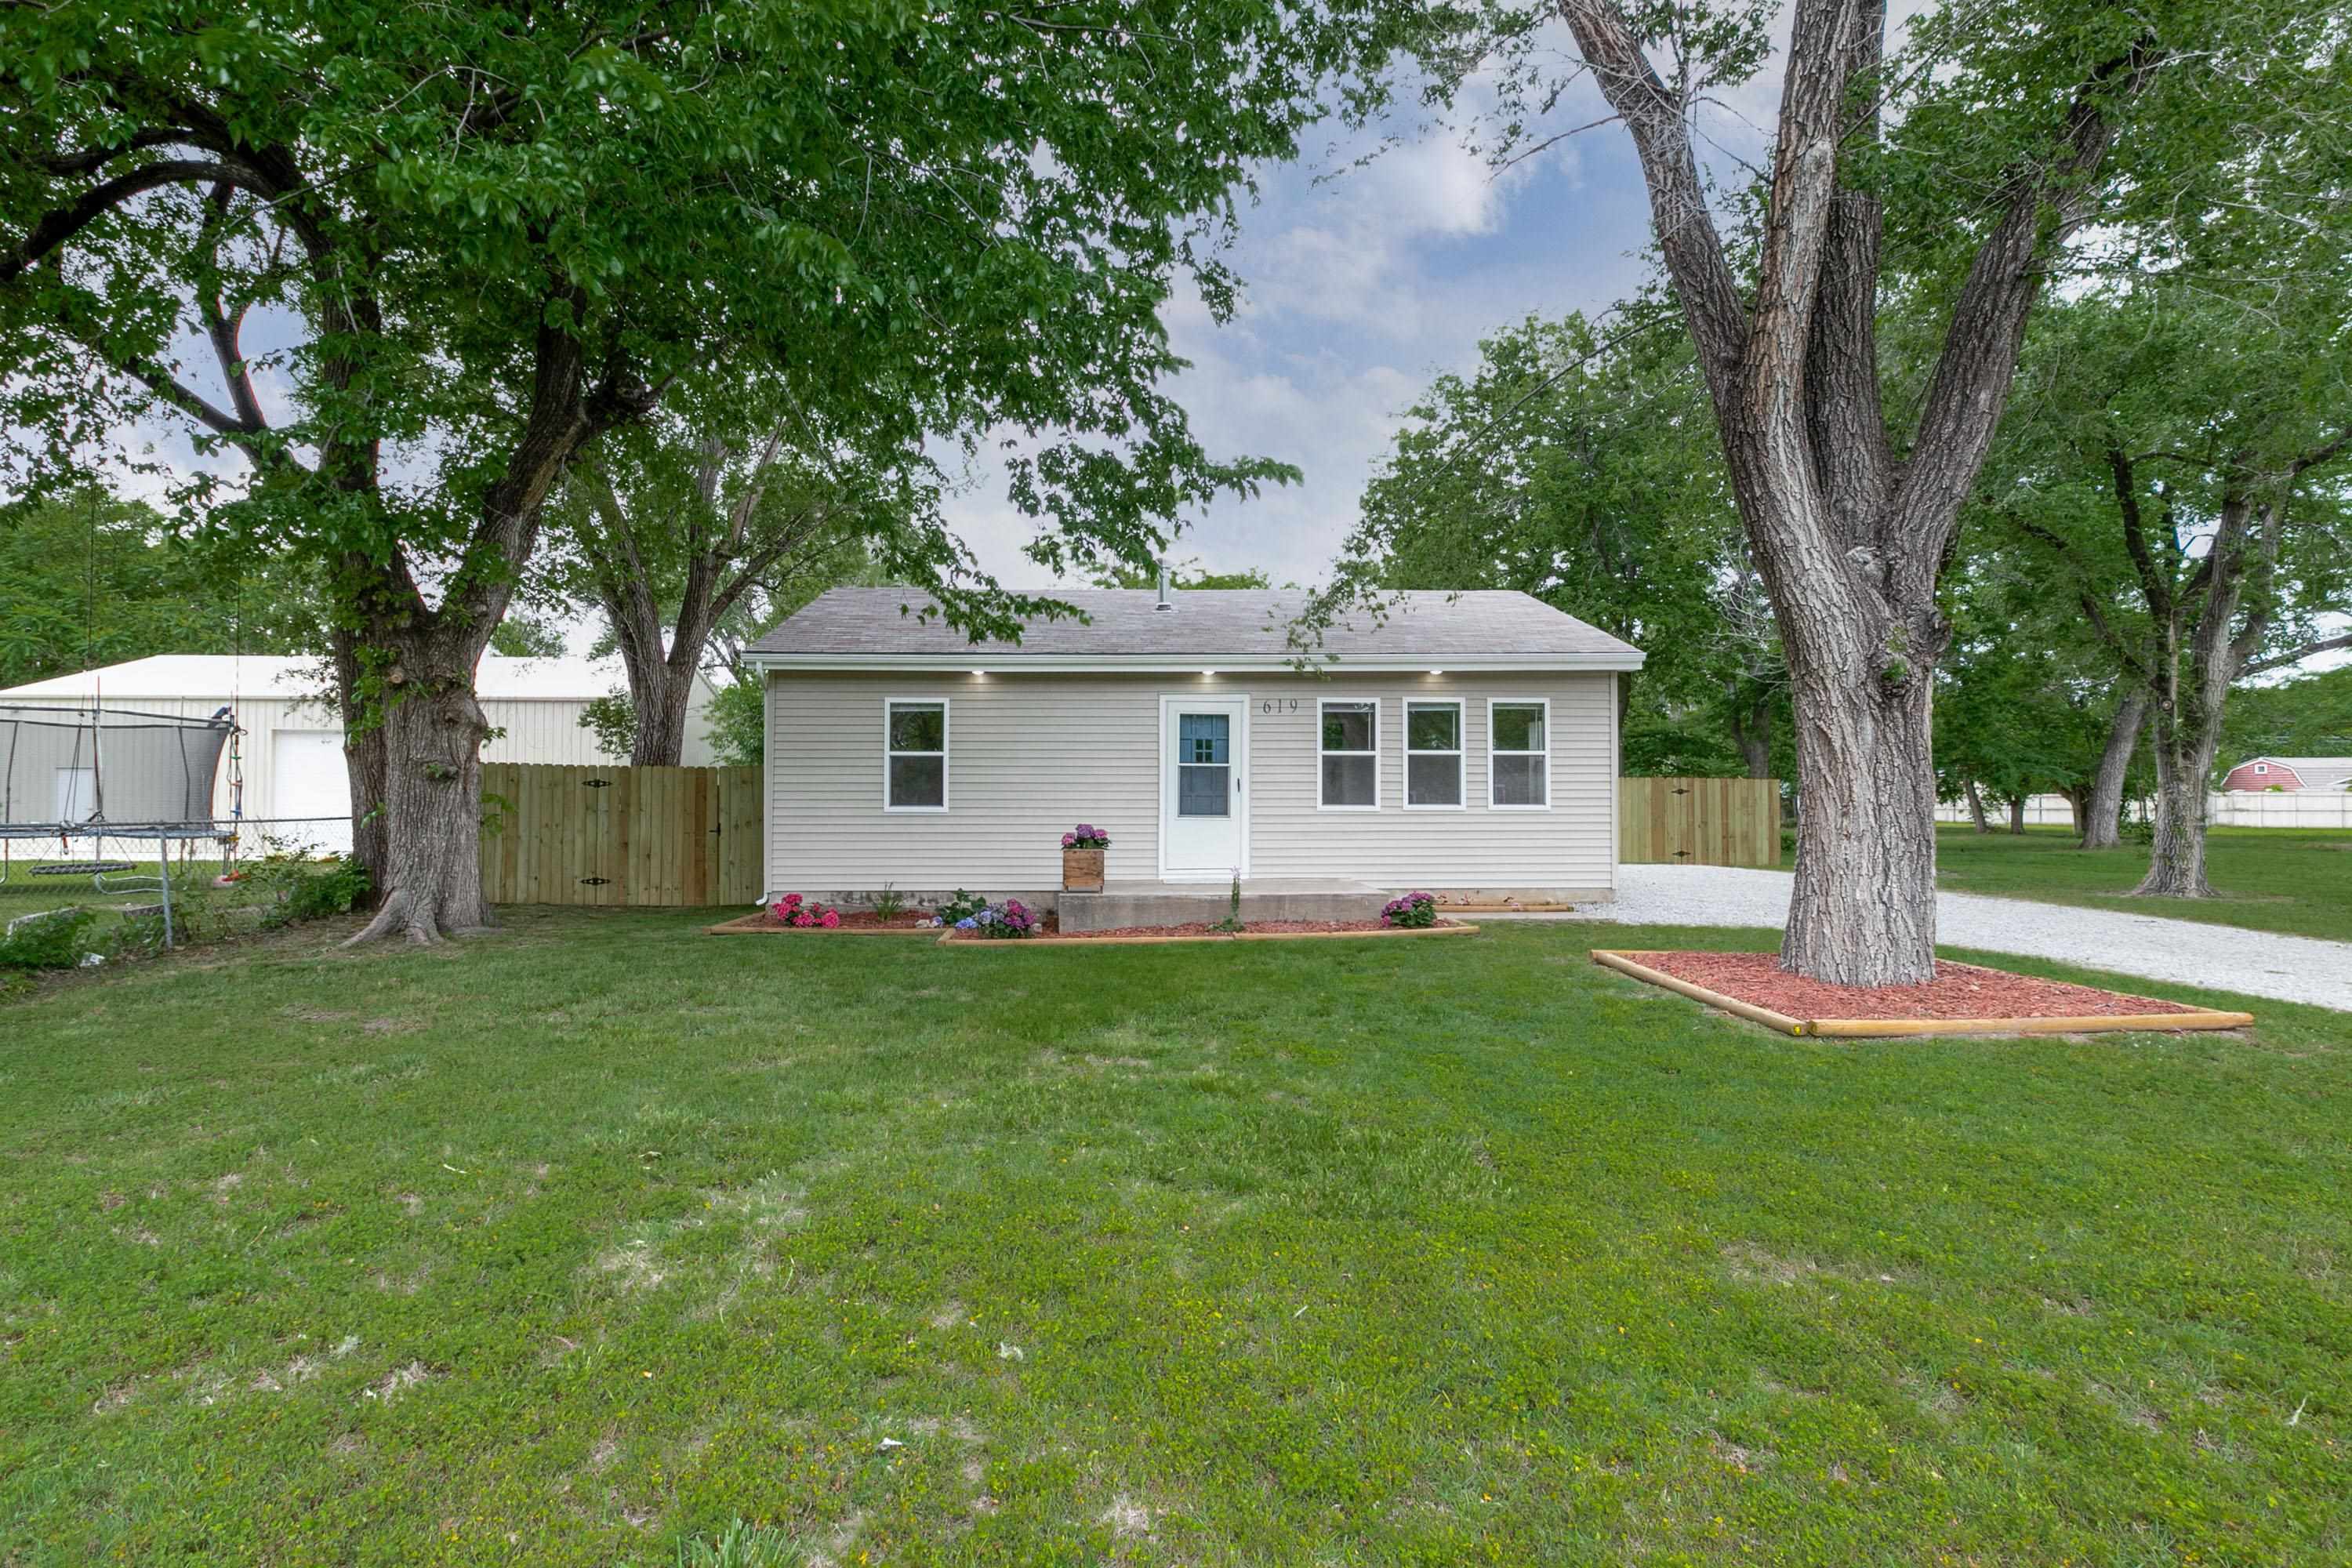 Newly remodeled, charming home in west wichita! This is the one you've been looking for! Great curb 